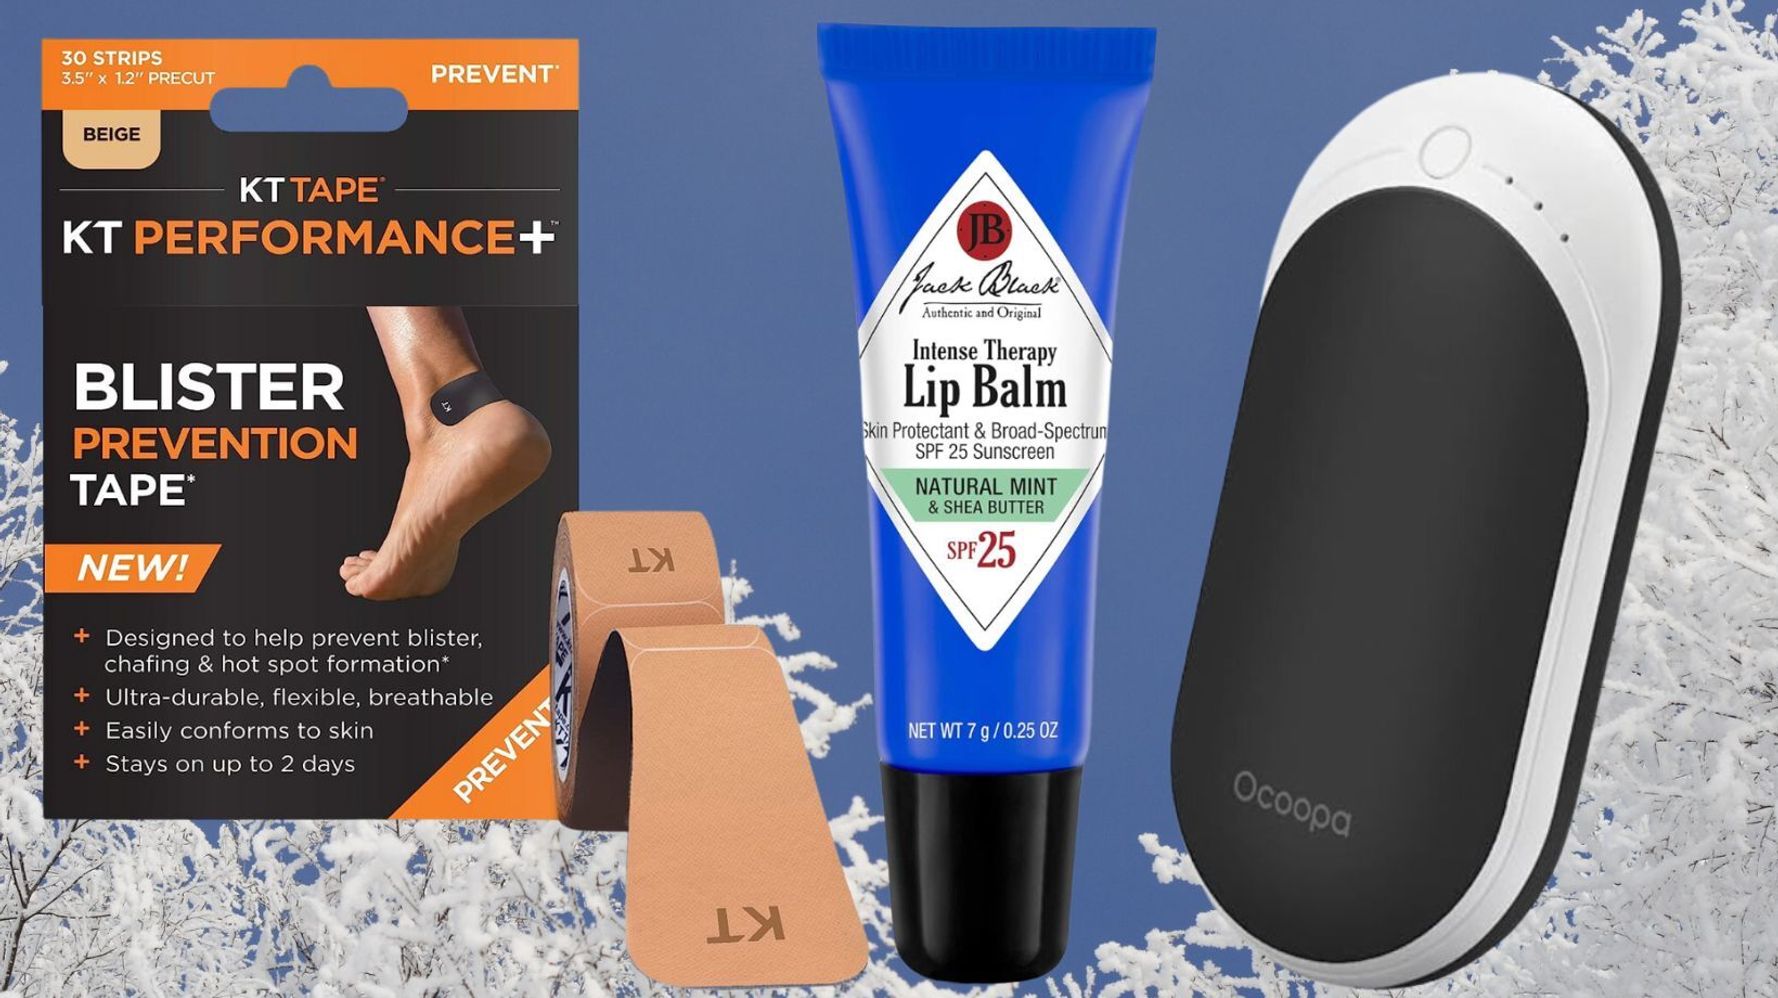 32 Products That Are Great To Have For Winter